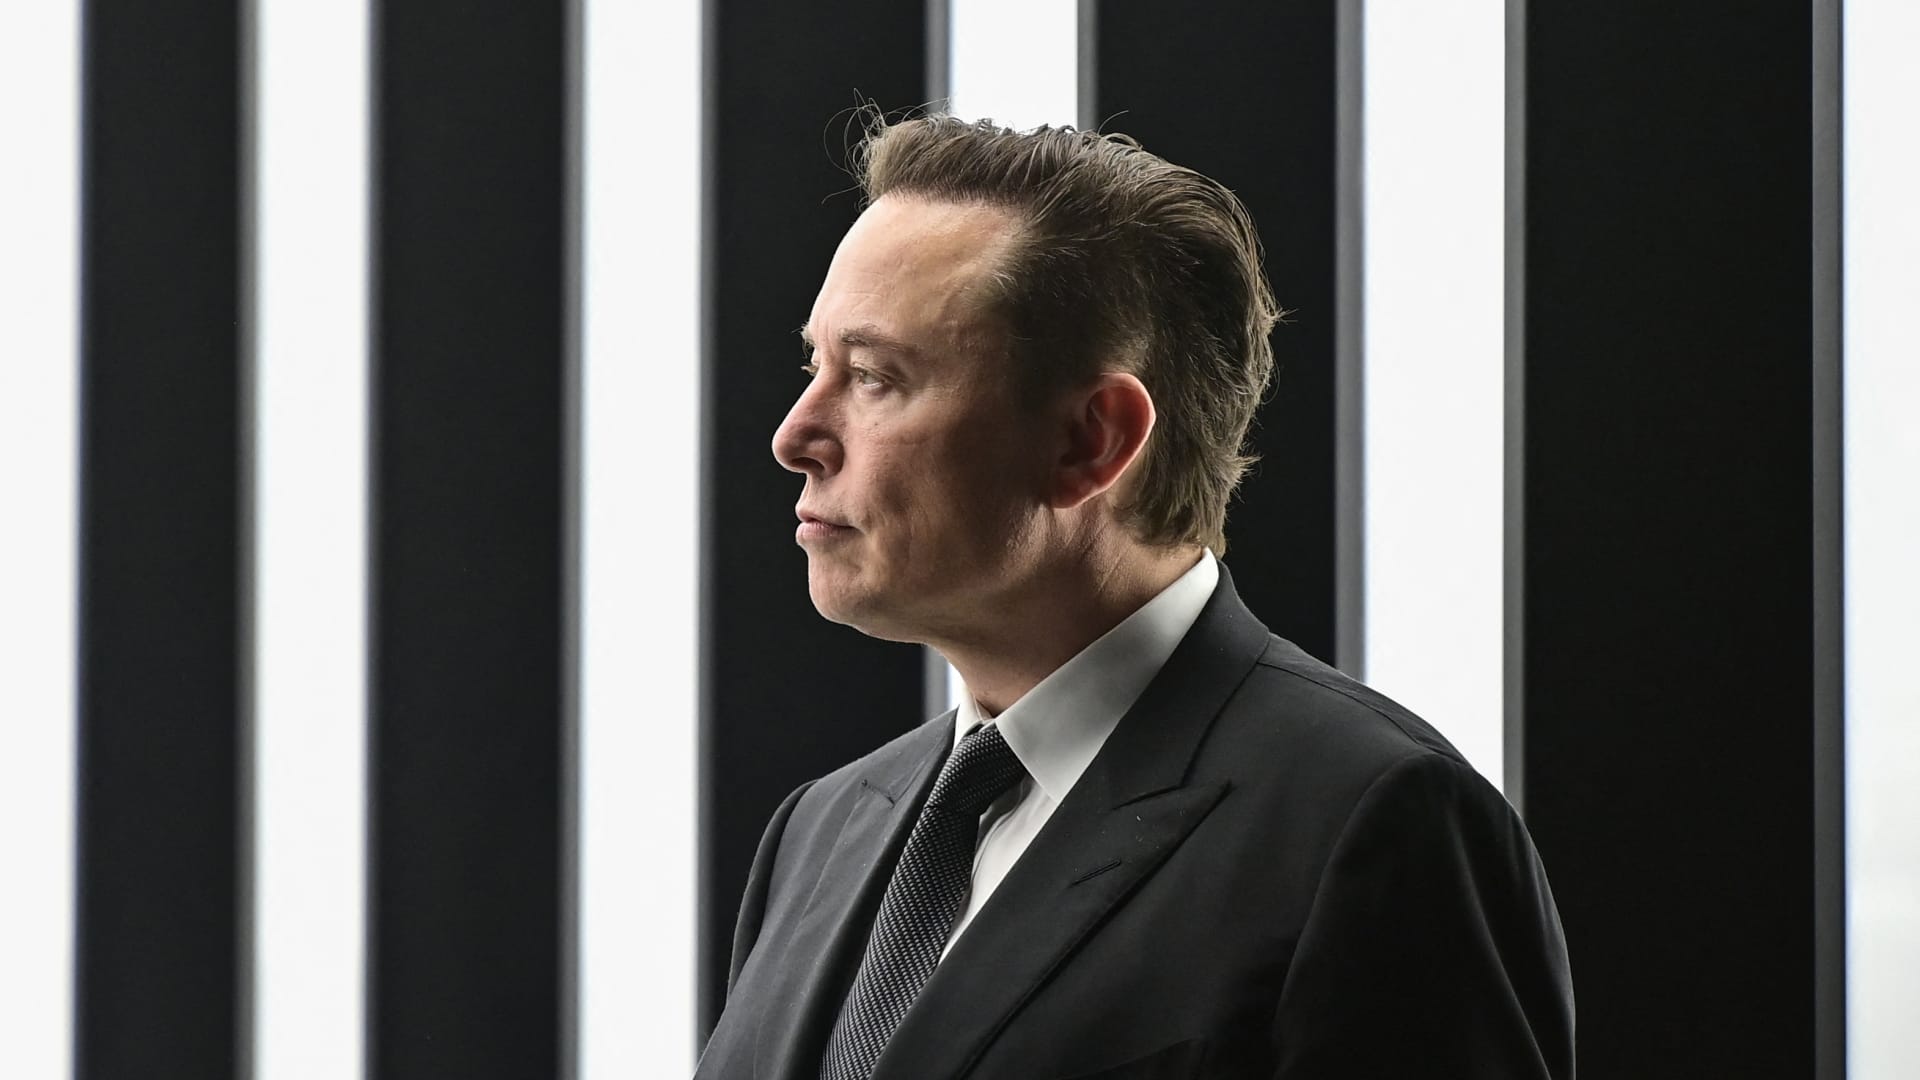 Musk to explore potential tender offer for Twitter, has $46.5B in committed fina..